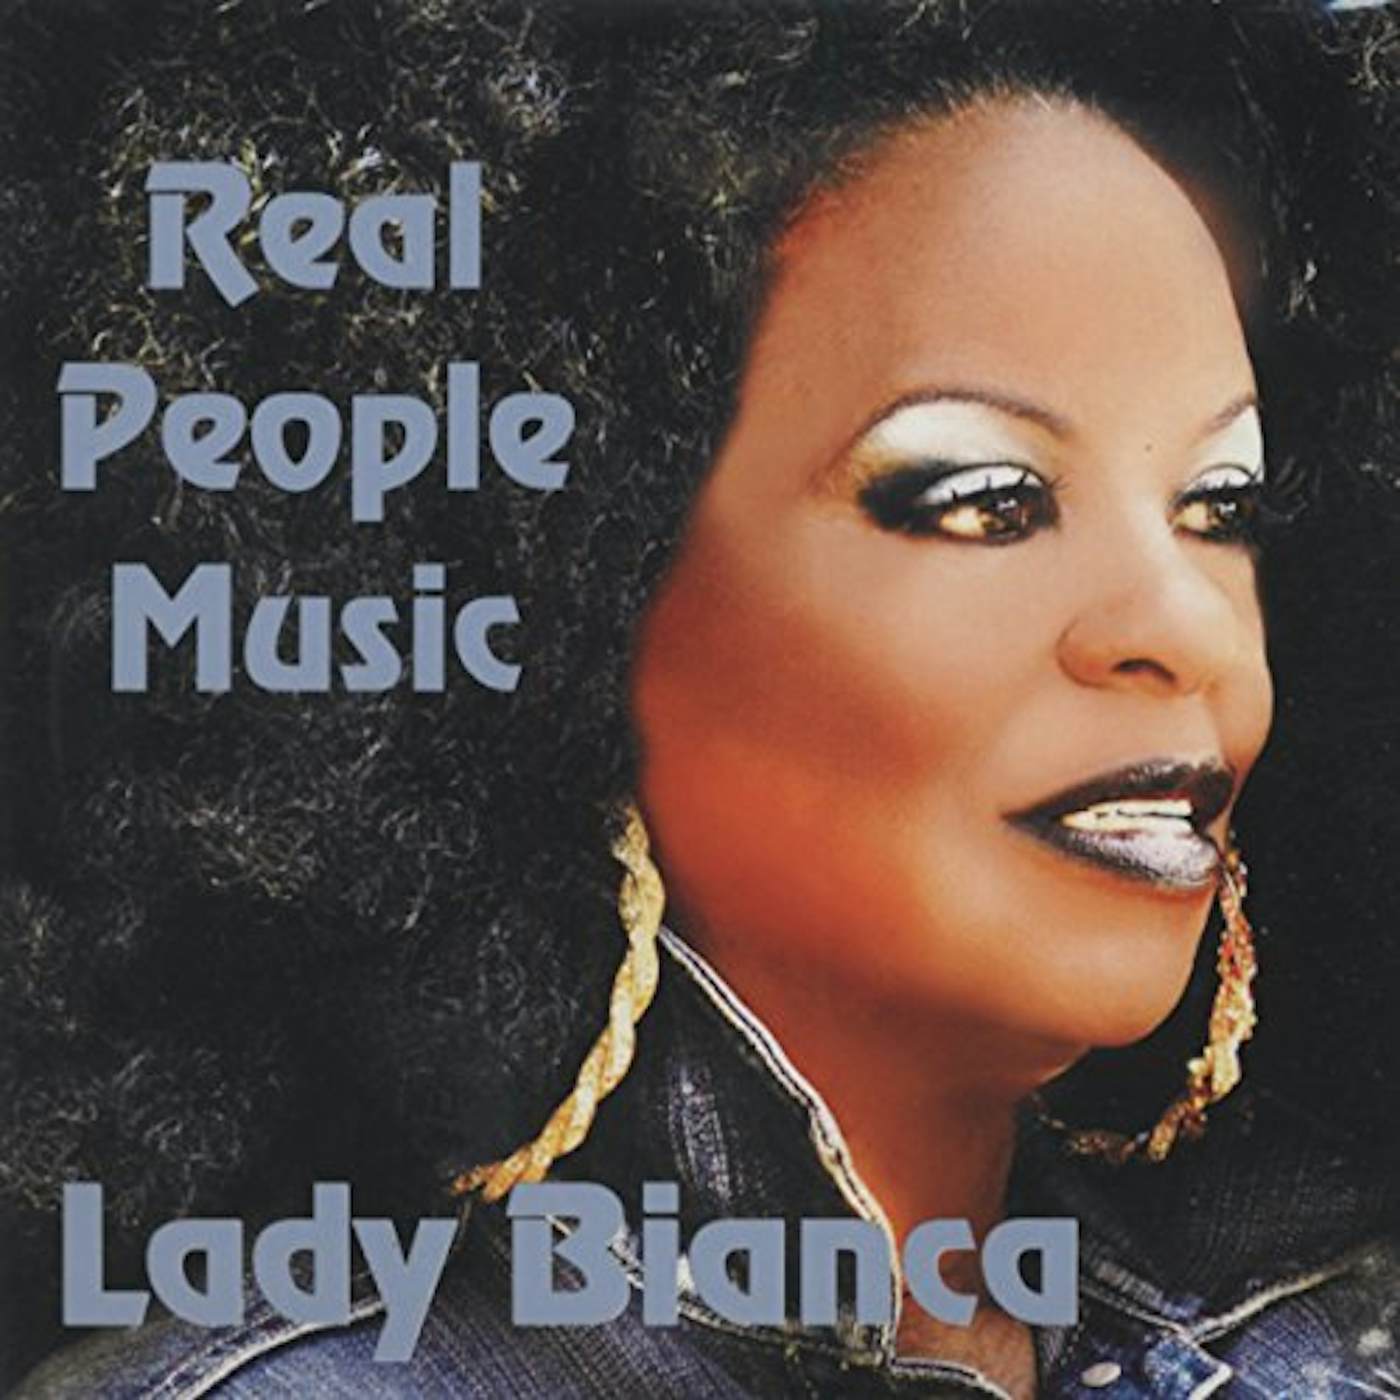 Lady Bianca REAL PEOPLE MUSIC CD